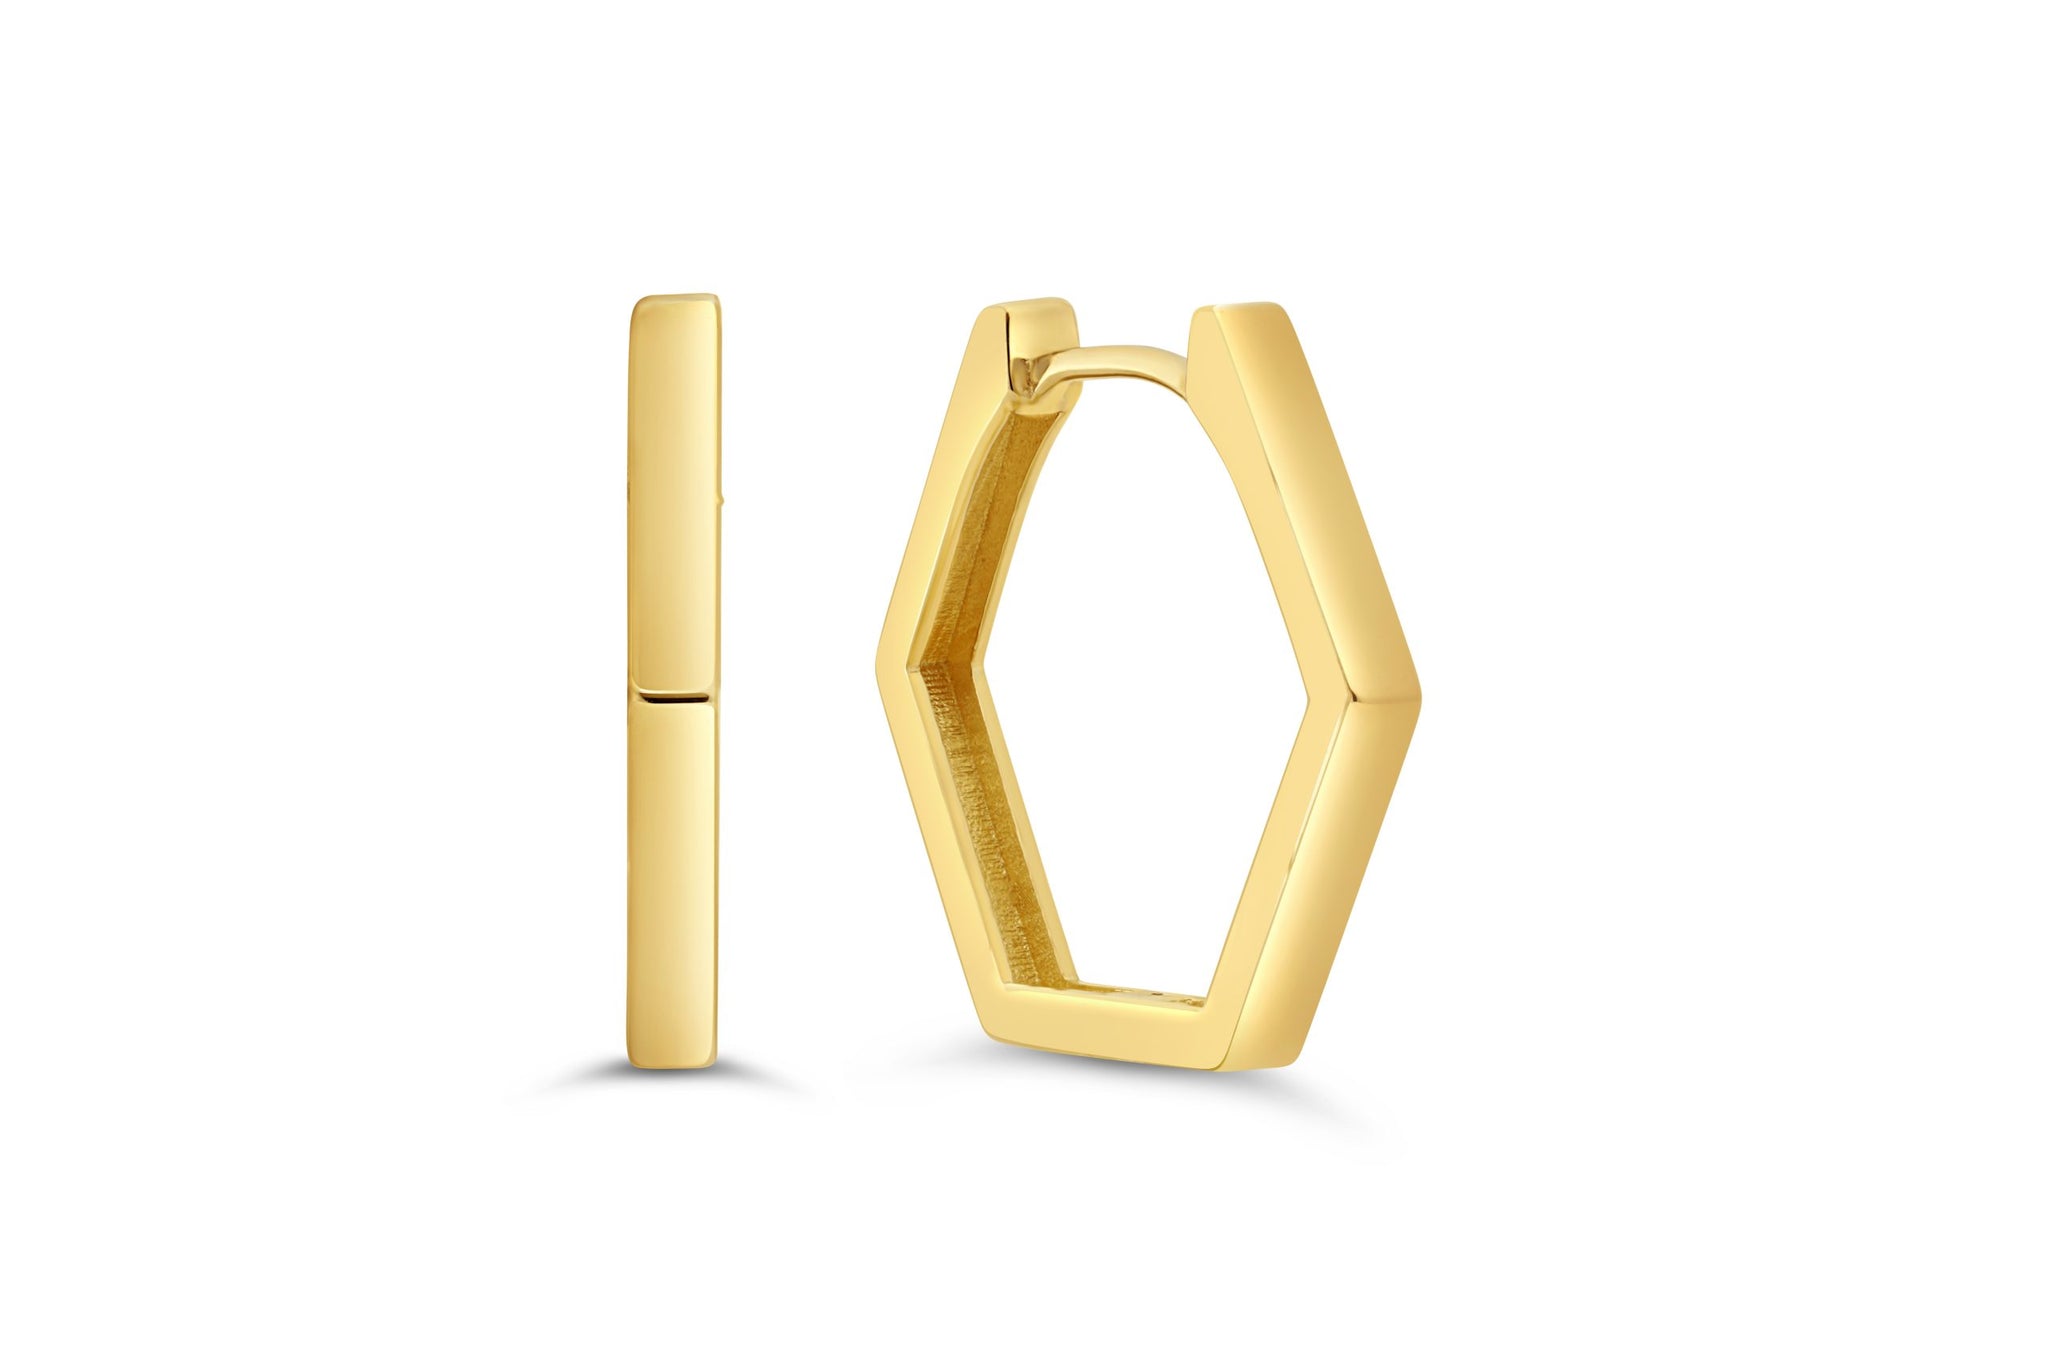 10K yellow gold huggie earrings with a distinct octagonal geometric shape, offering a modern and stylish addition to any jewelry collection from RUDIX JEWELLERY.